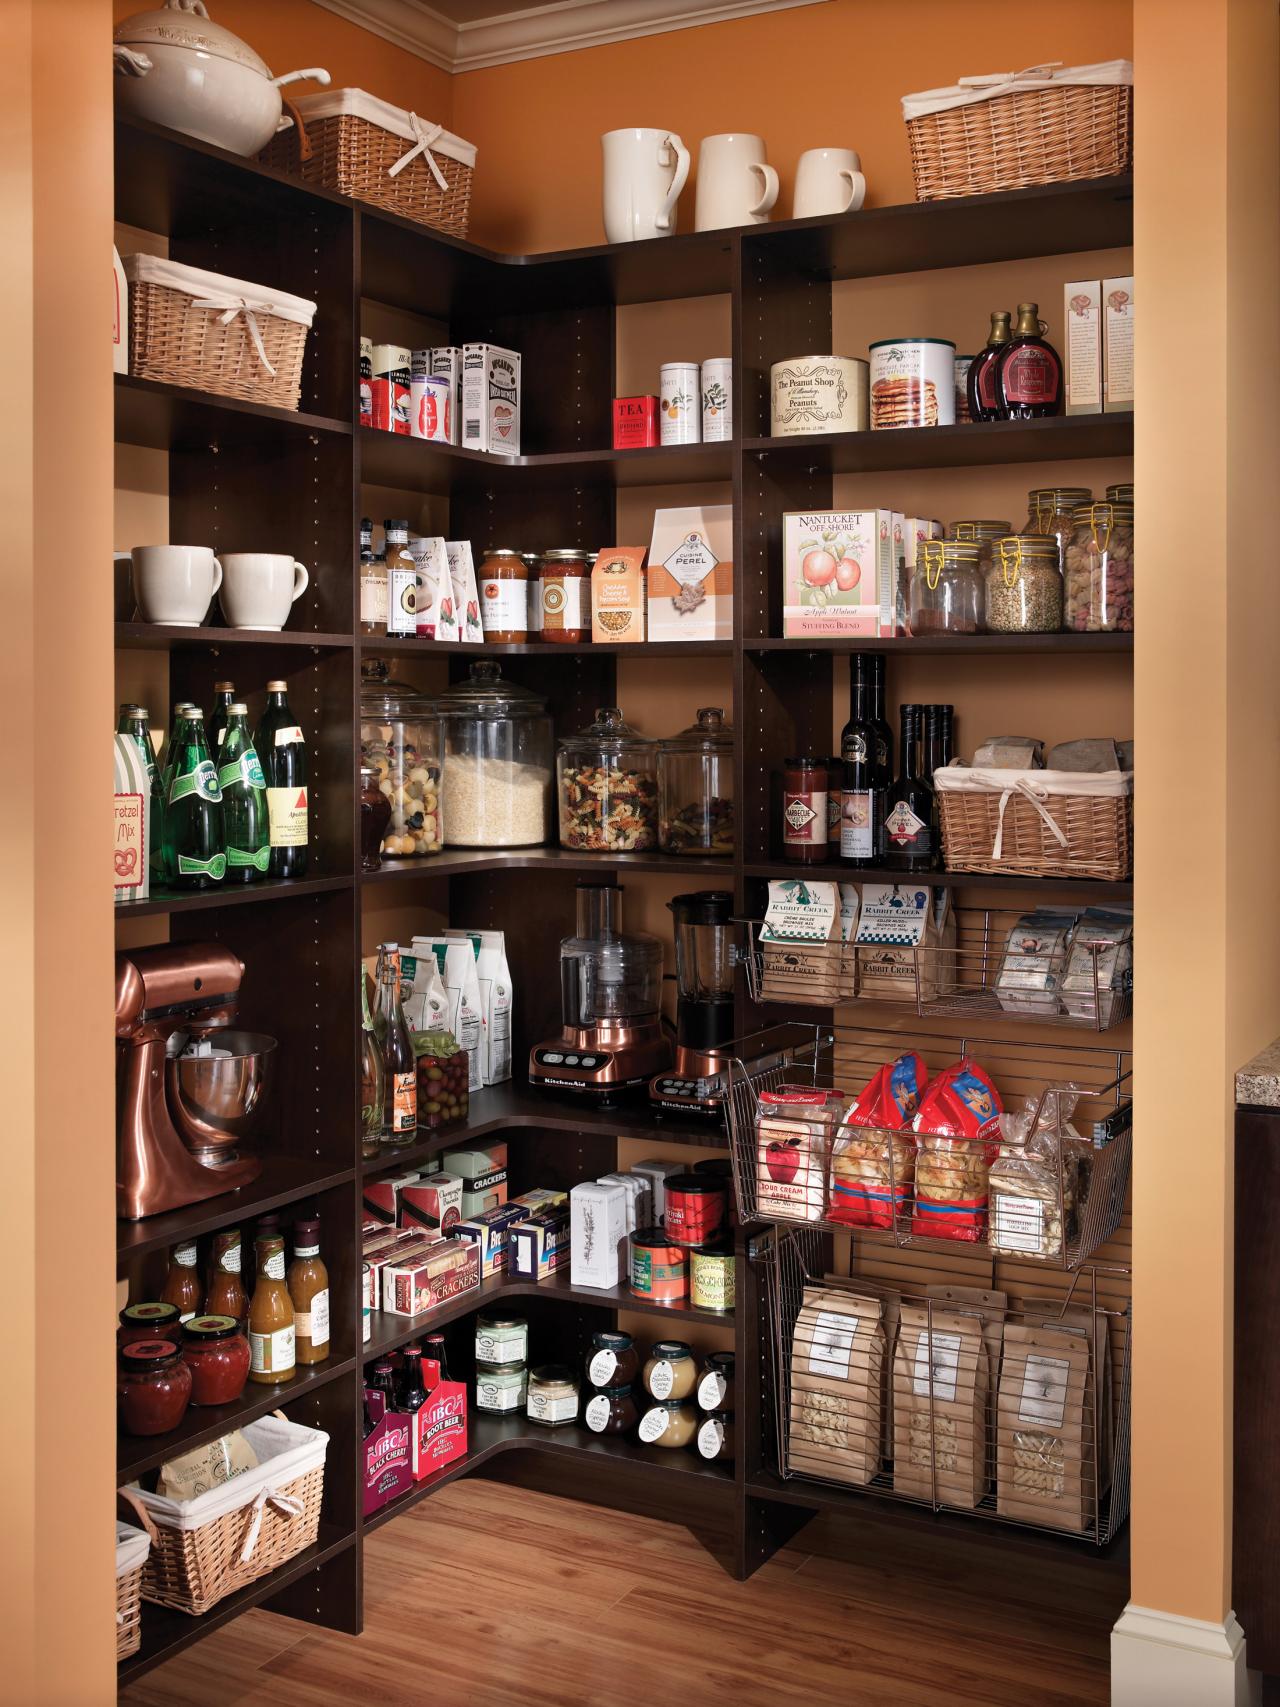 An attractive, well-organized pantry space can serve double duty as both storage and a display area.